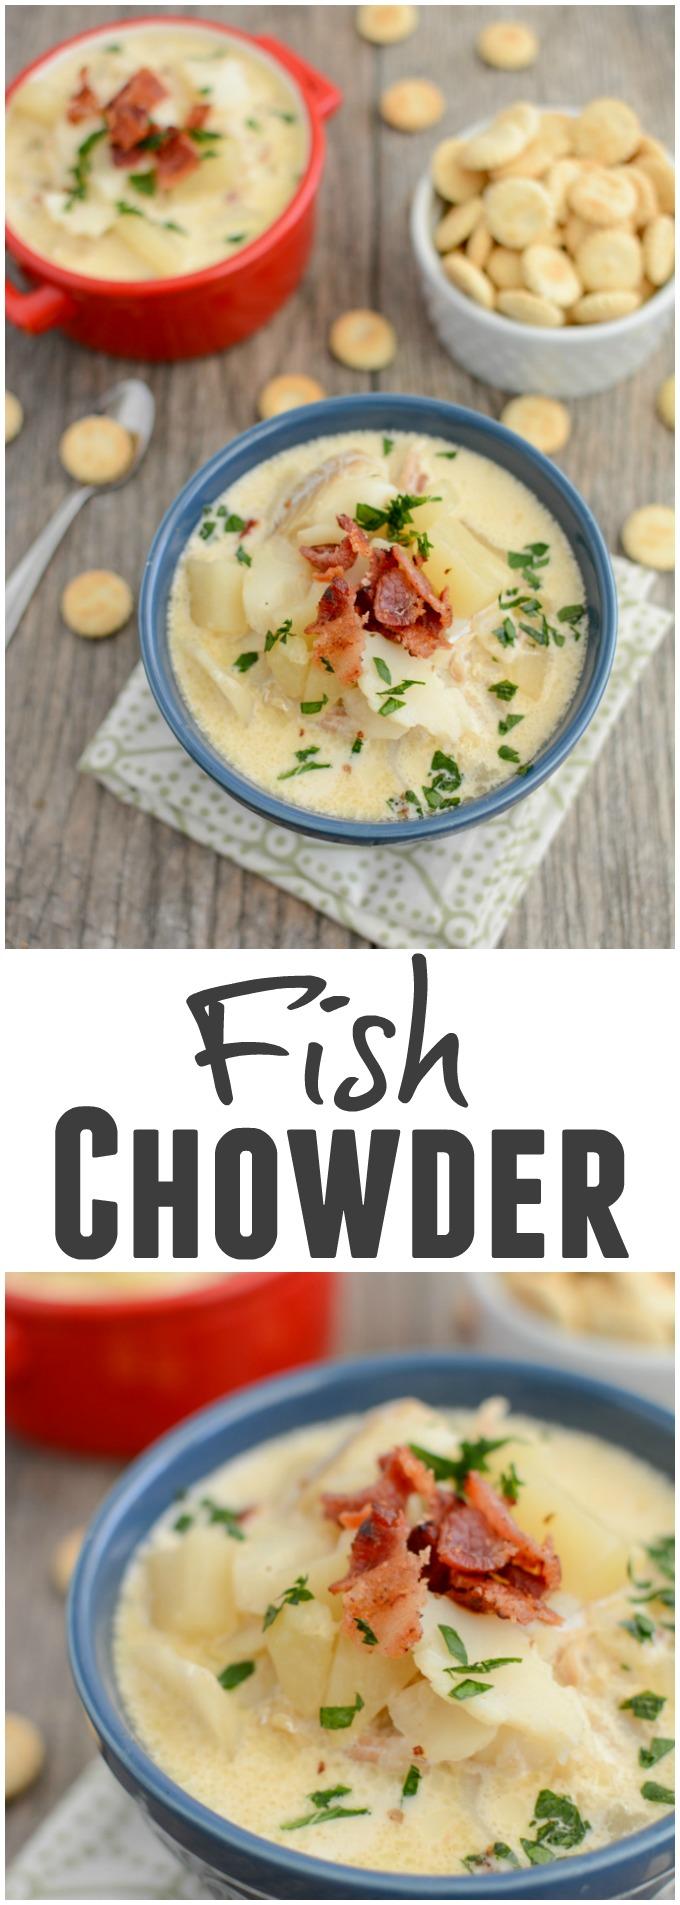 This Easy Fish Chowder tastes better than longer it sits! Make a big pot over the weekend and enjoy for lunch or dinner all week!